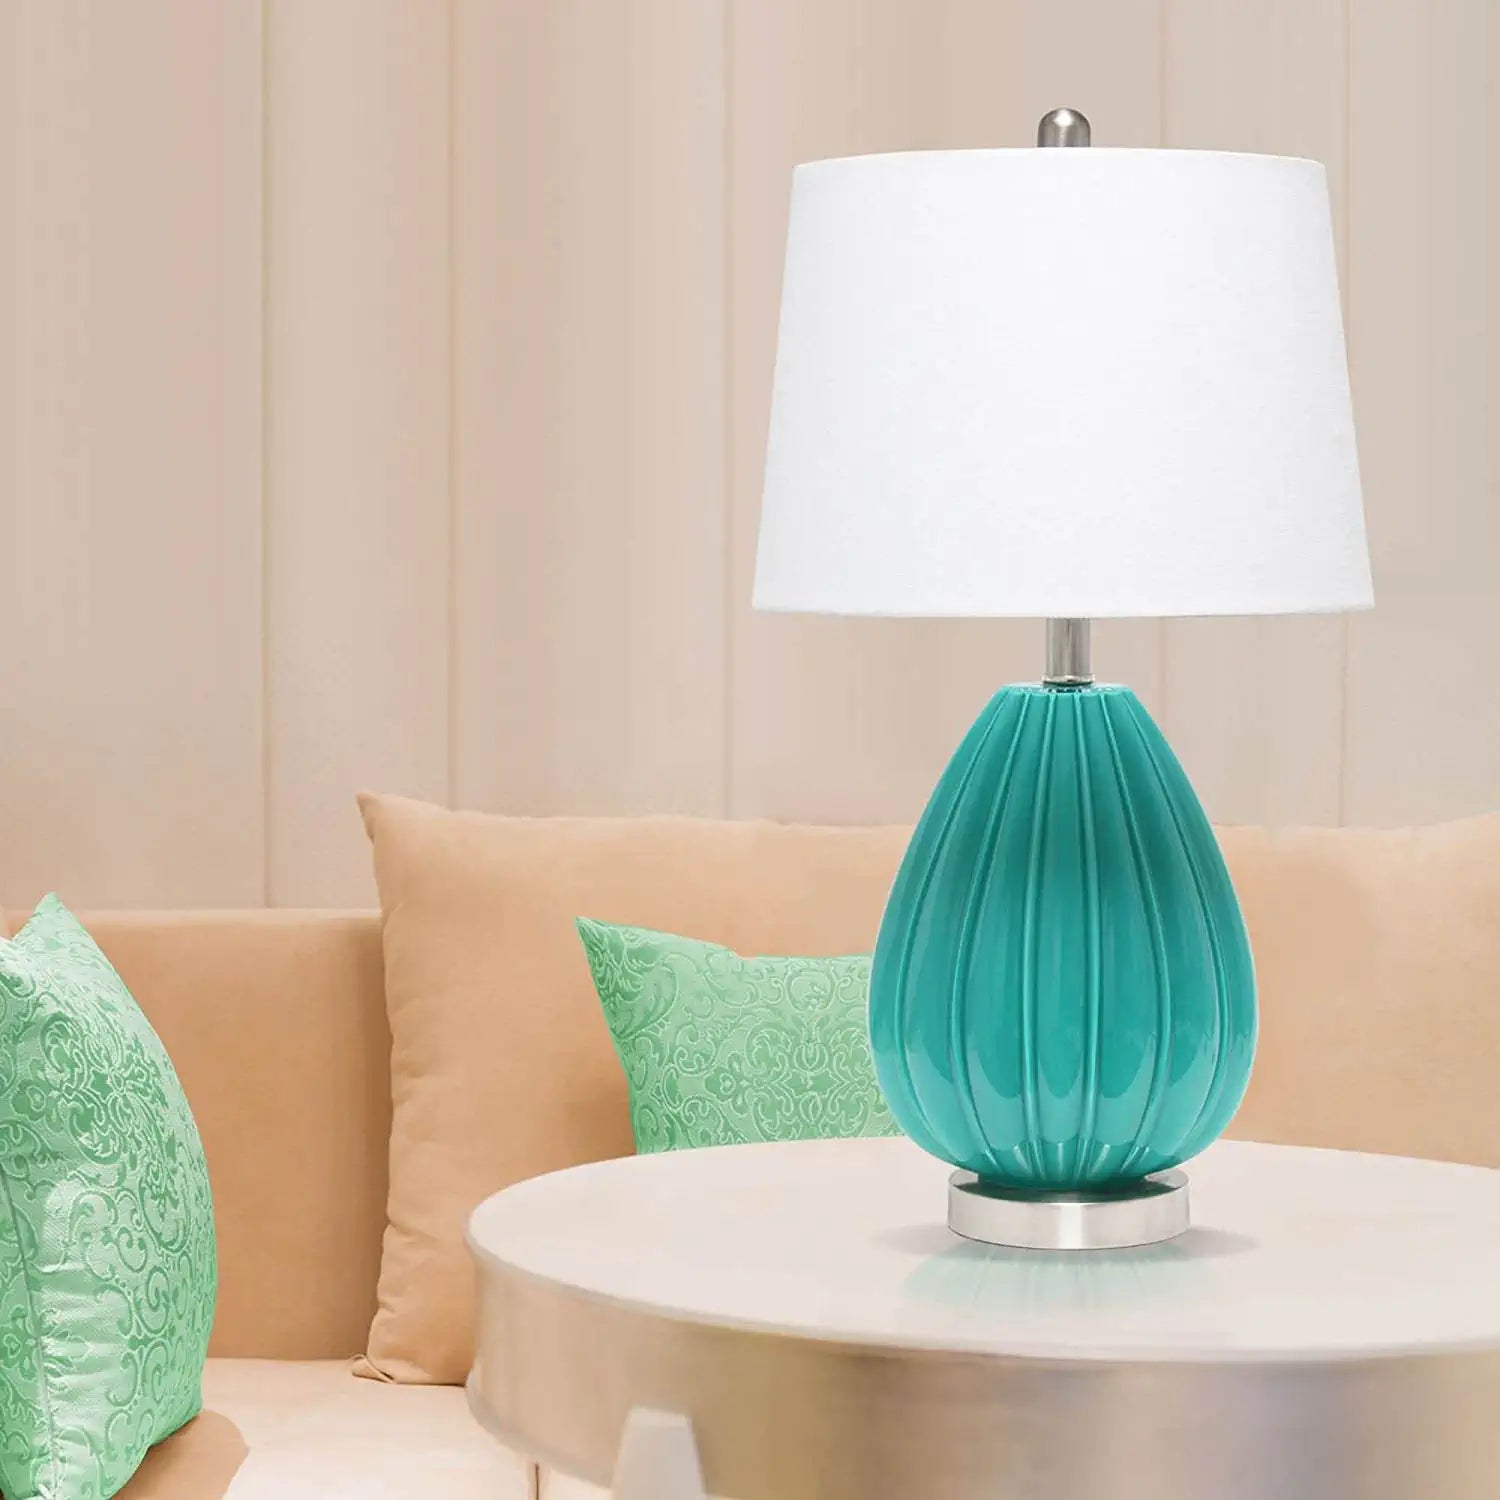 Lalia Home Contemporary Pleated Table Lamp with White Fabric Shade - Teal